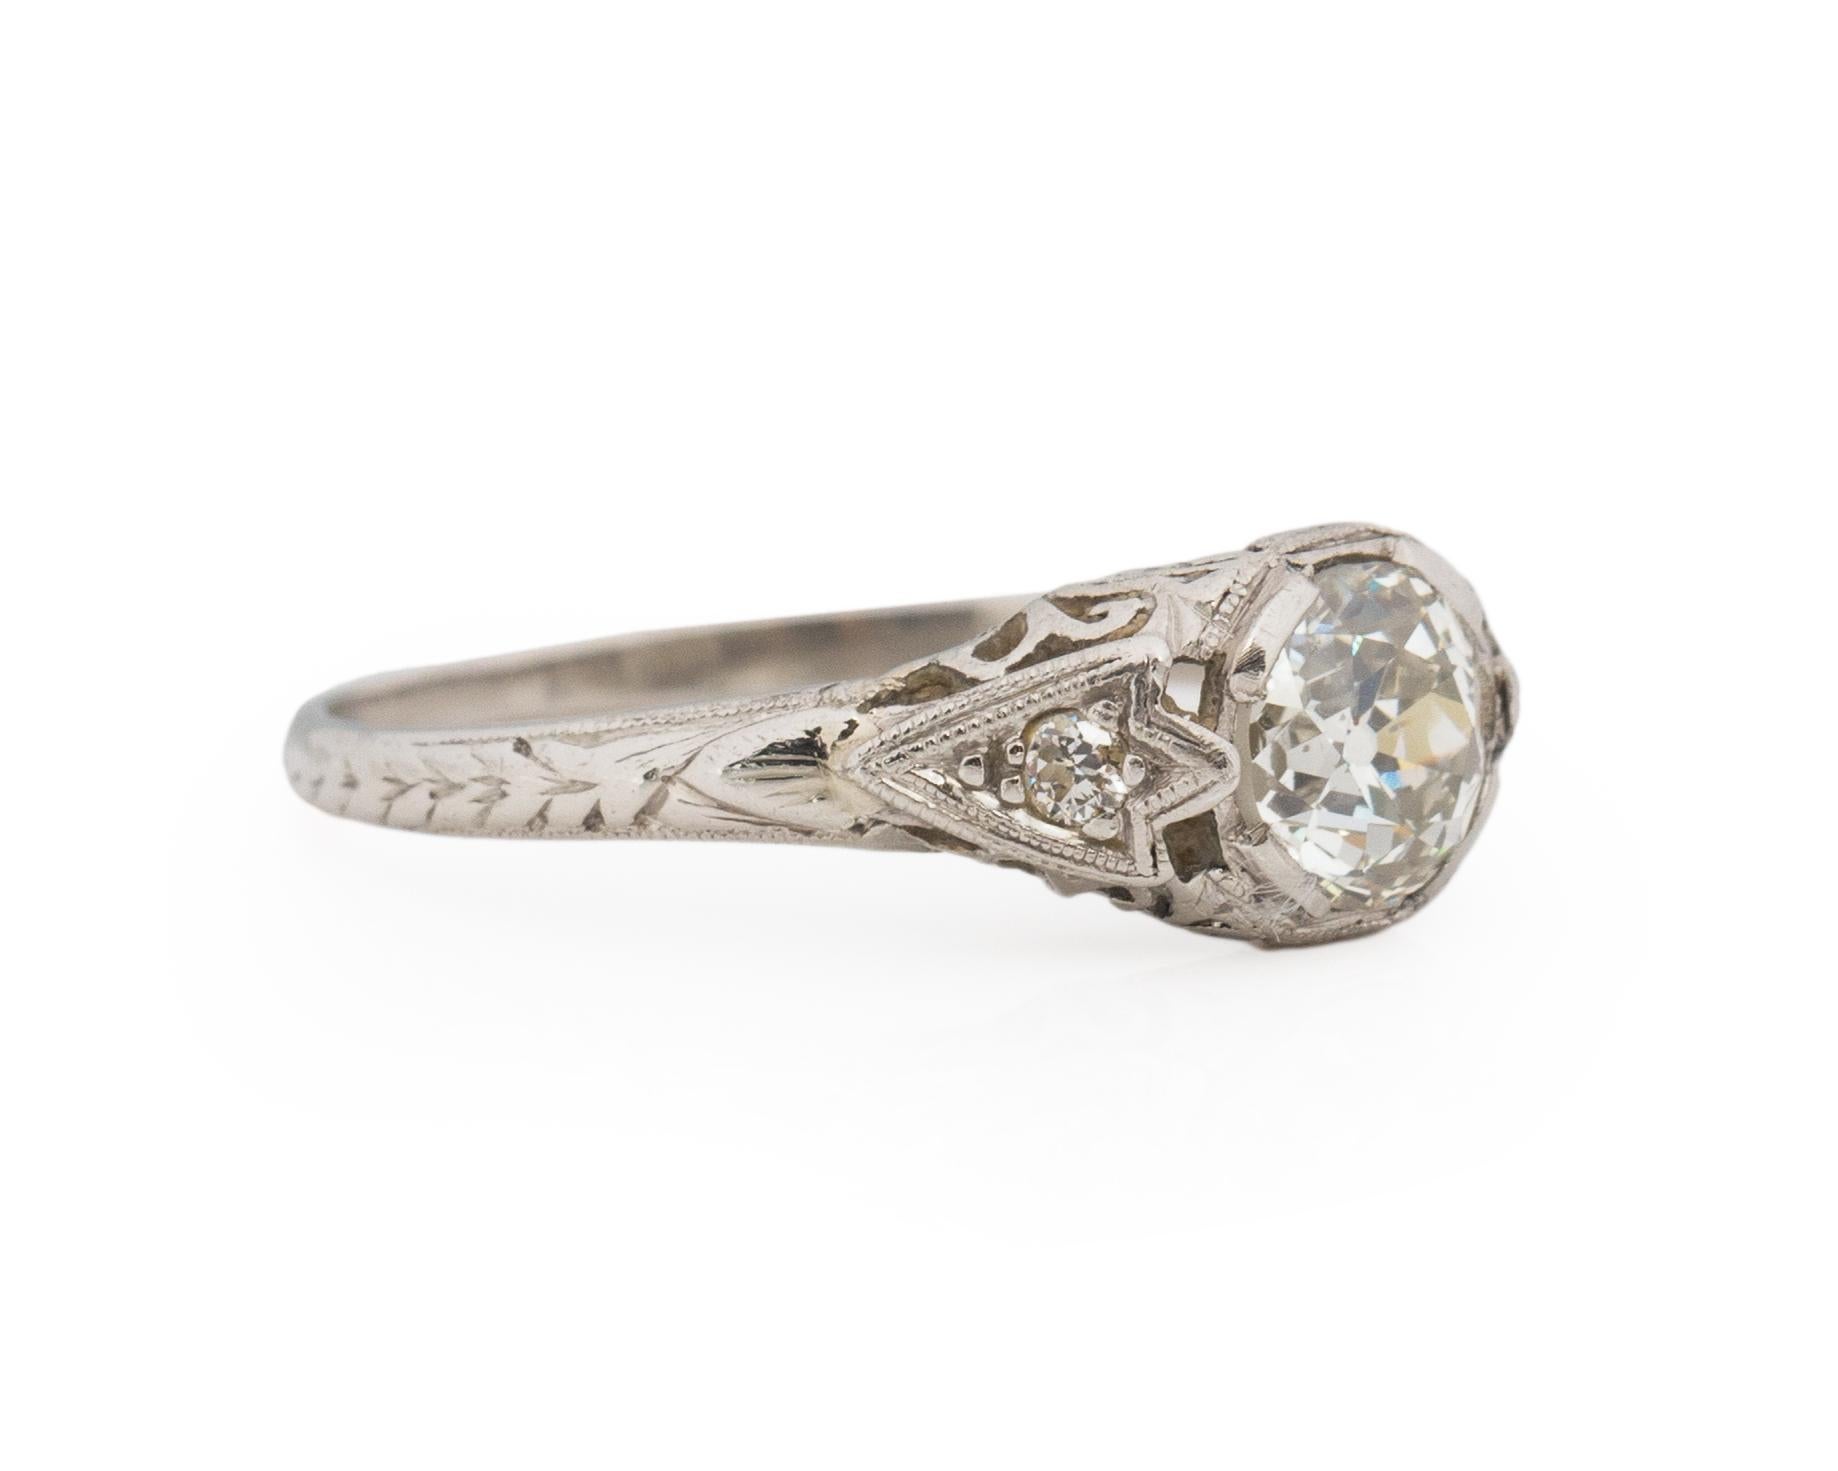 Ring Size: 5.75
Metal Type: Platinum [Hallmarked, and Tested]
Weight: 2.6 grams

Center Diamond Details:
GIA REPORT #: 2211385724
Weight: .86ct
Cut: Old European brilliant
Color: M
Clarity: SI1
Measurements: 5.78mm x 5.69mm

Side Stone